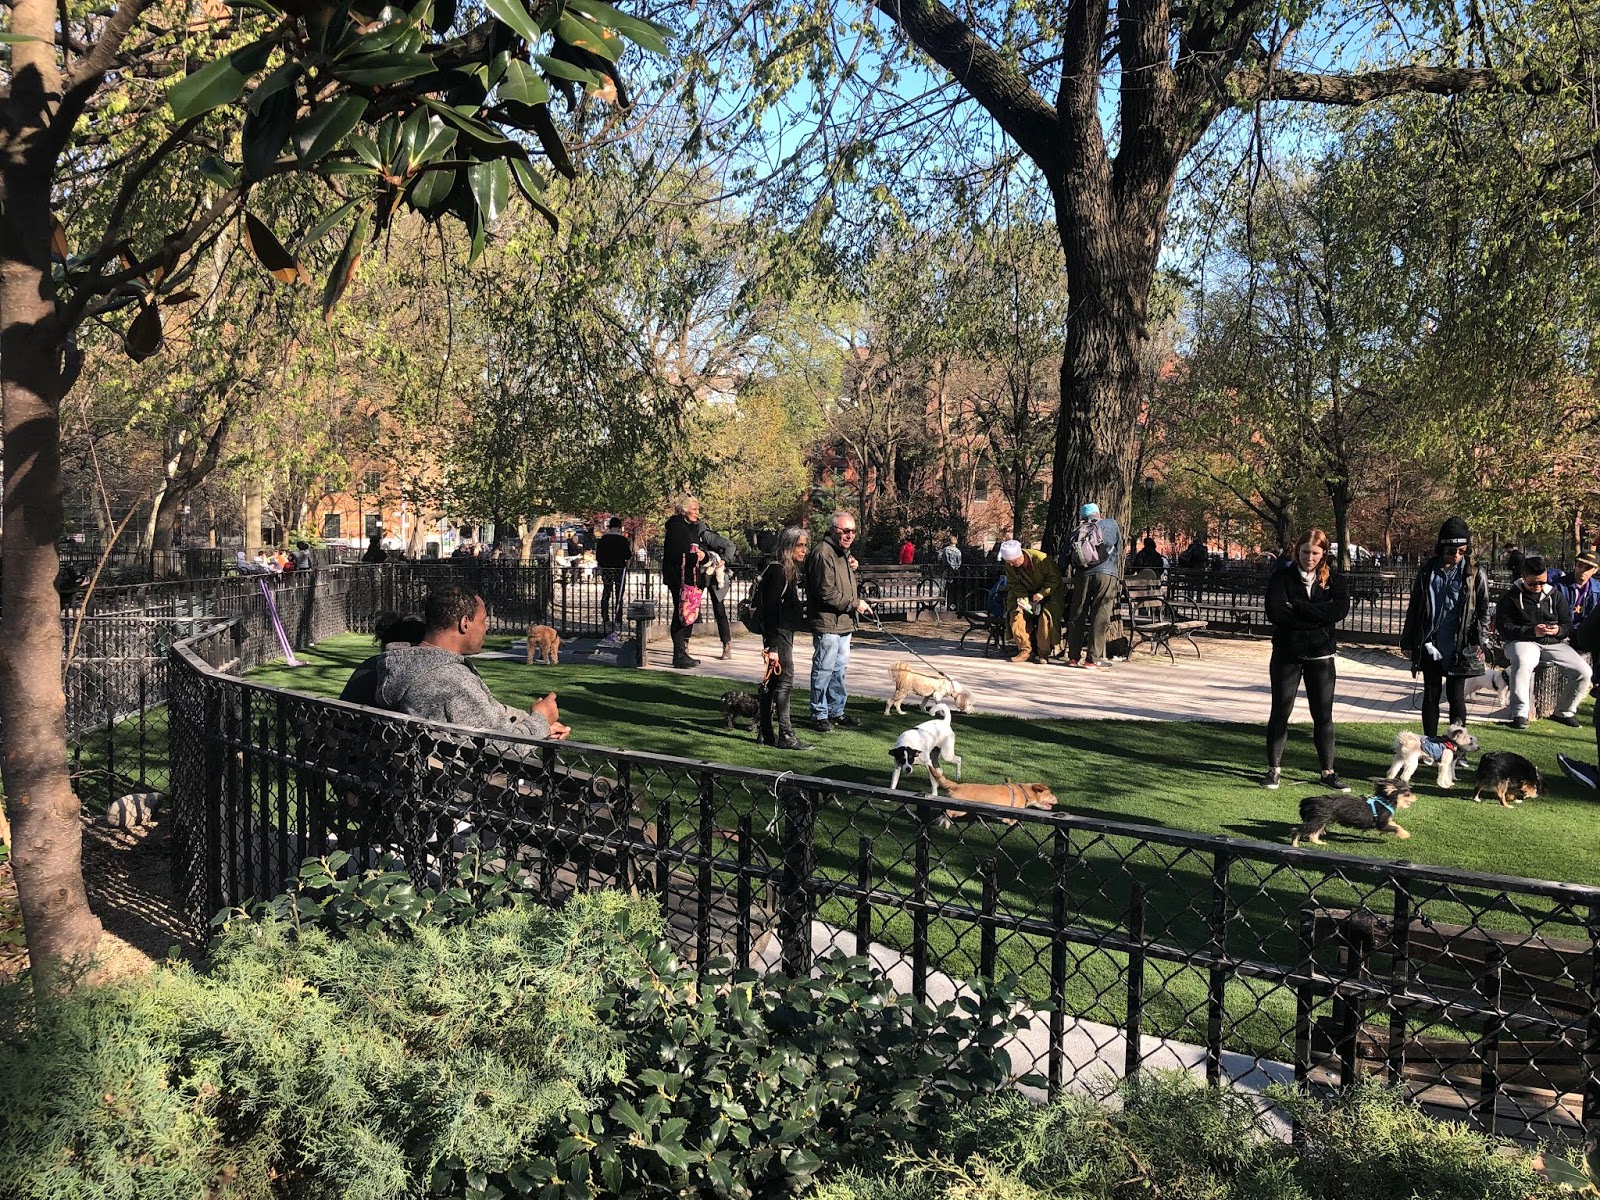 Ev Grieve Renovated Small Dog Run Reopens In Tompkins Square Park